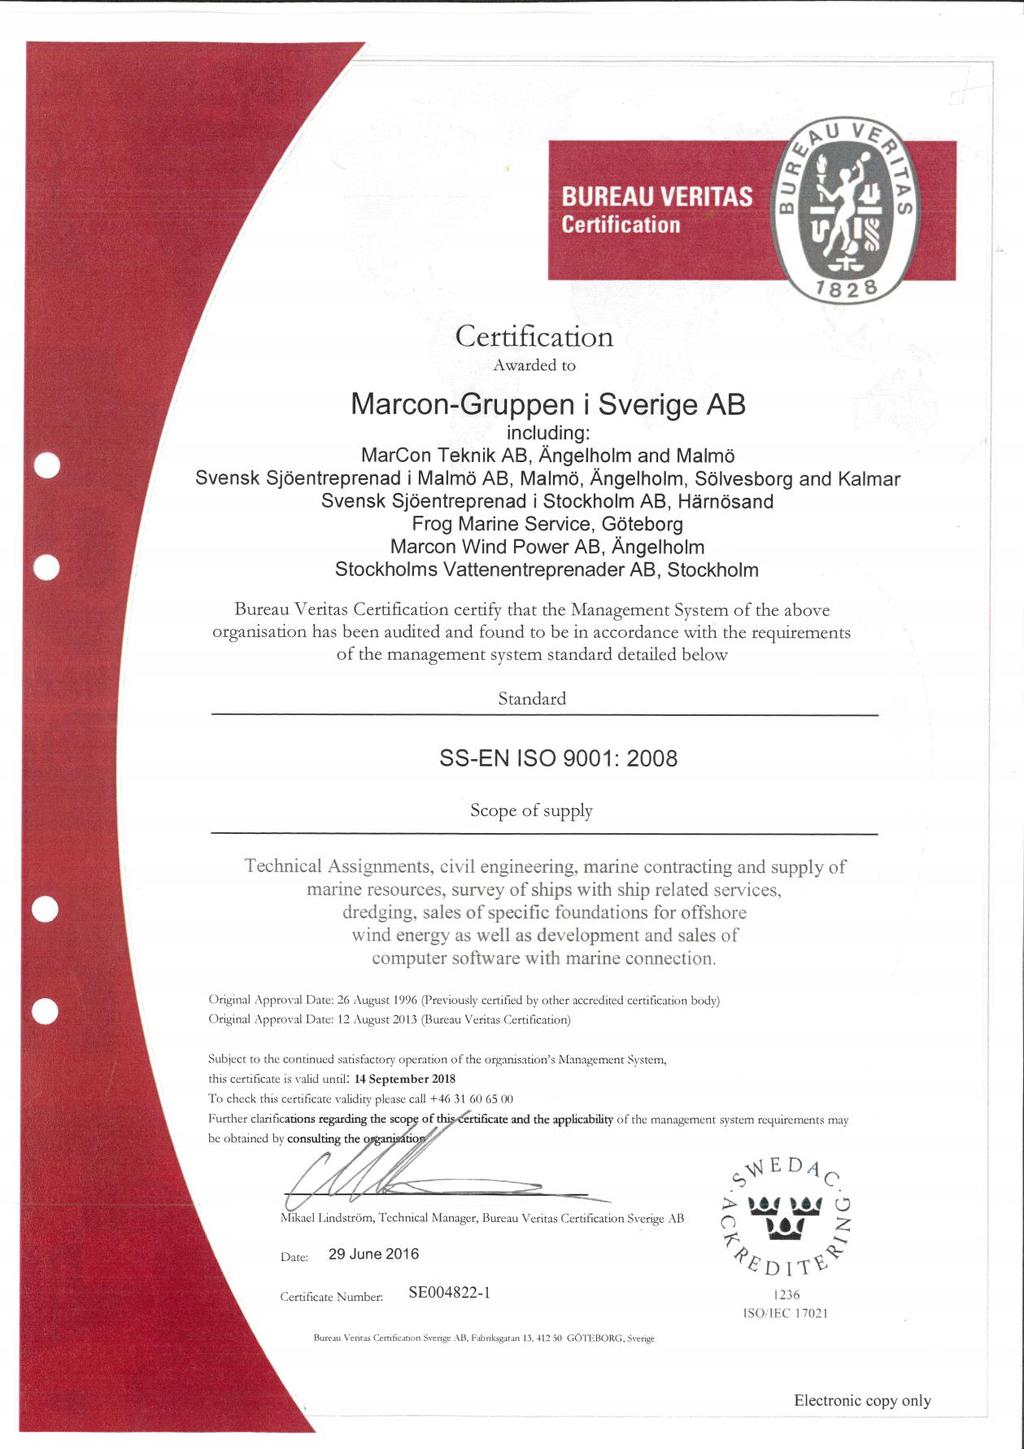 Appendix 2: Copy of ISO certificate, issued